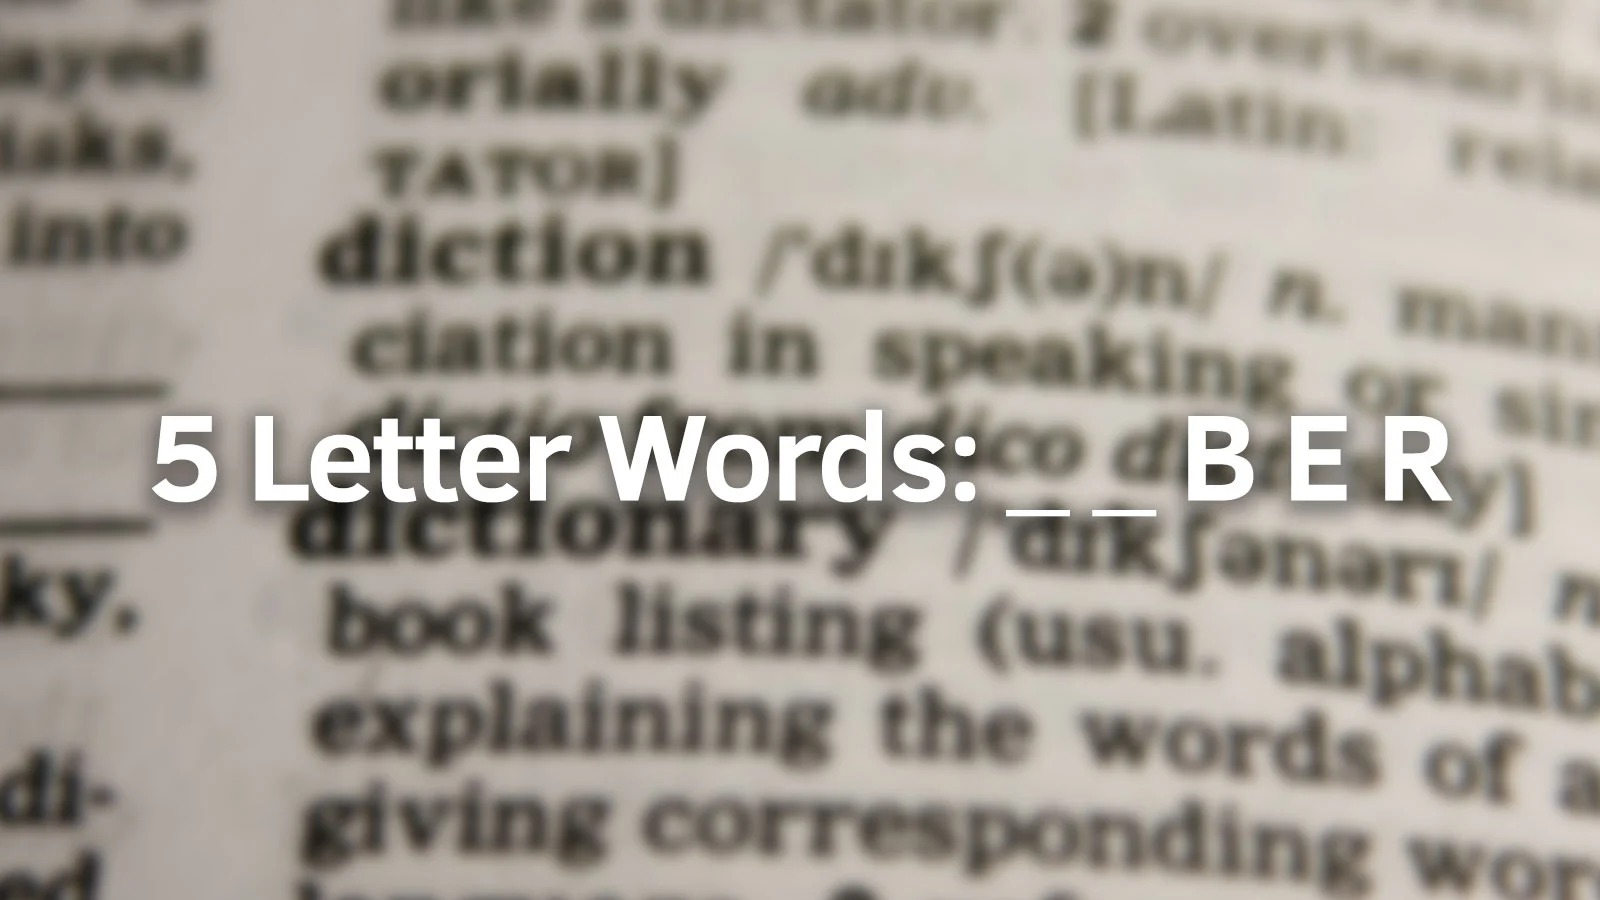 5 Letter Words that end with the letters BER